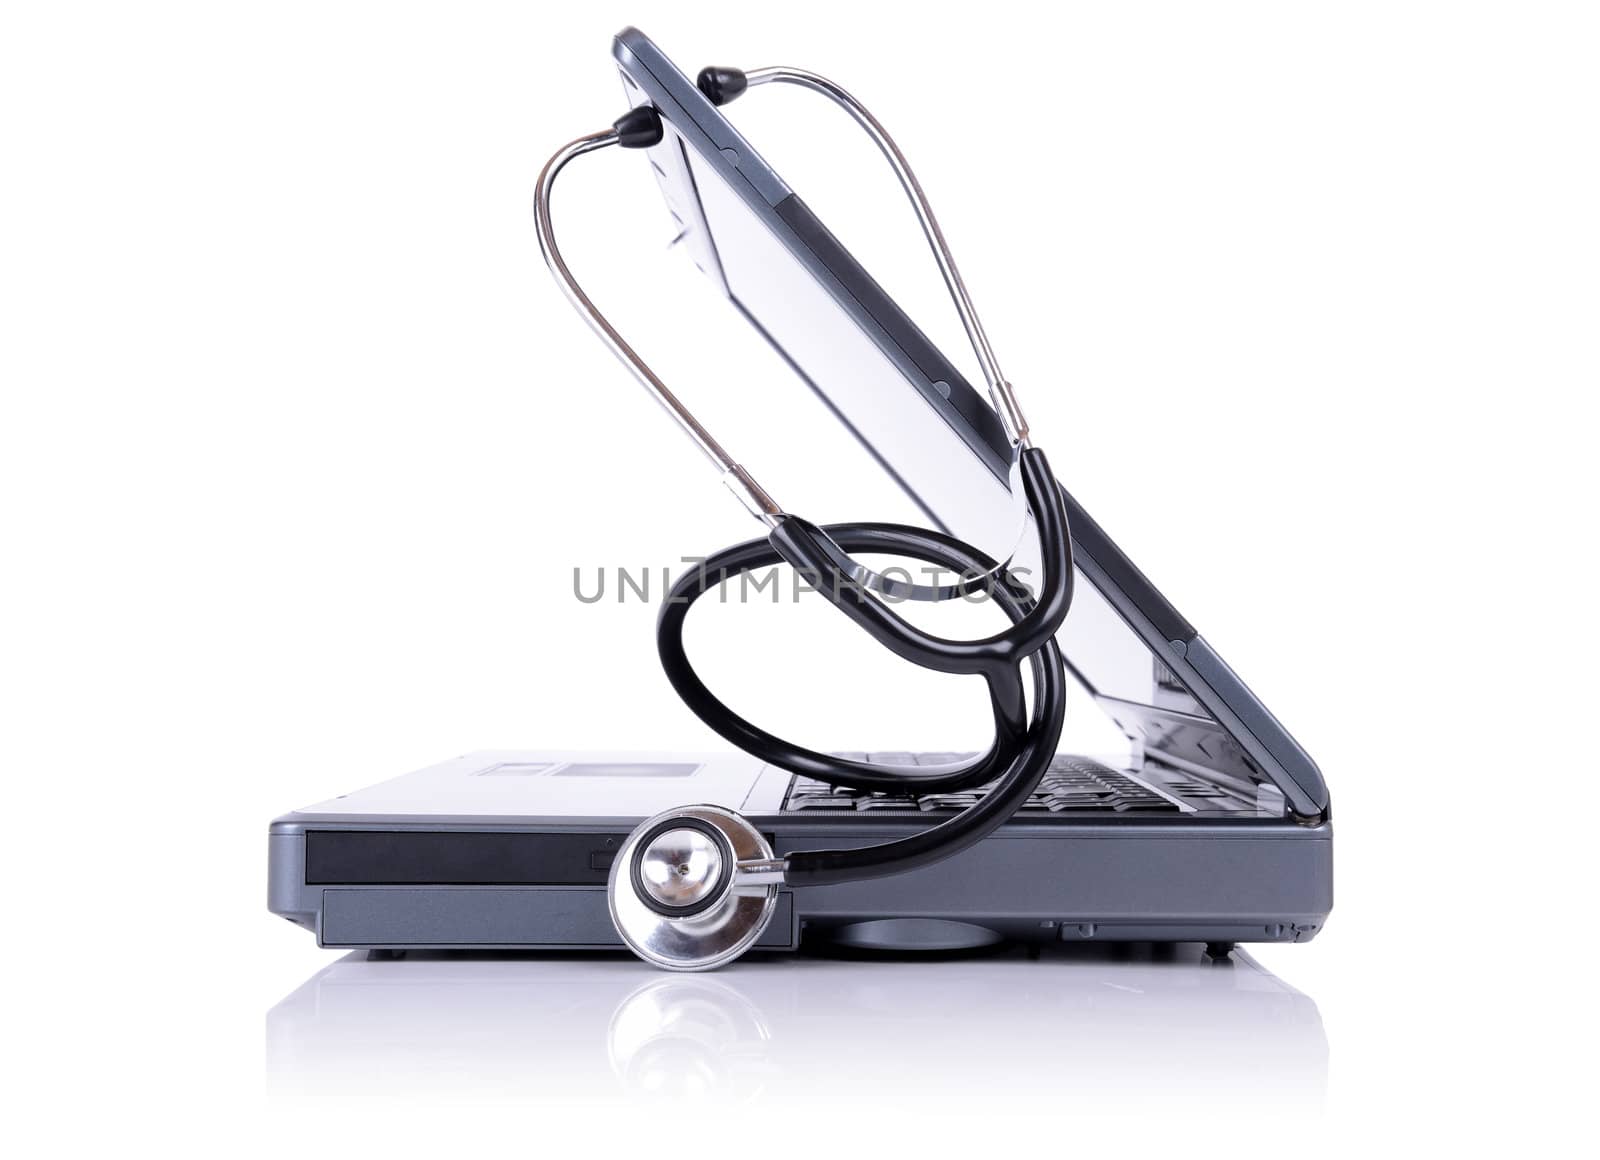 Stethoscope and laptop in profile isolated on white background